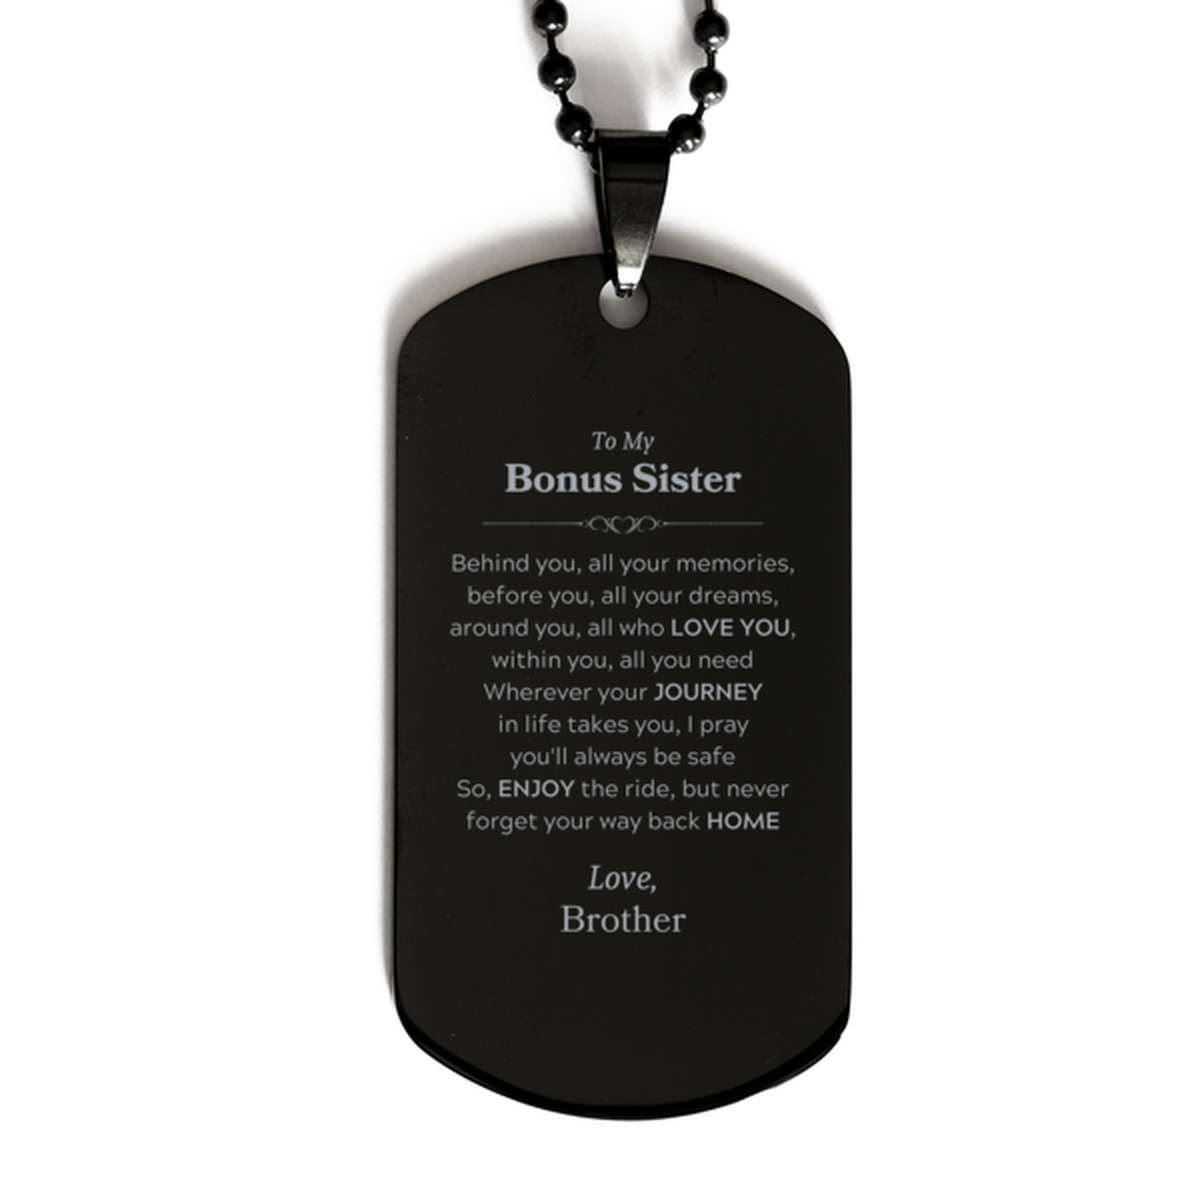 To My Bonus Sister Graduation Gifts from Brother, Bonus Sister Black Dog Tag Christmas Birthday Gifts for Bonus Sister Behind you, all your memories, before you, all your dreams. Love, Brother